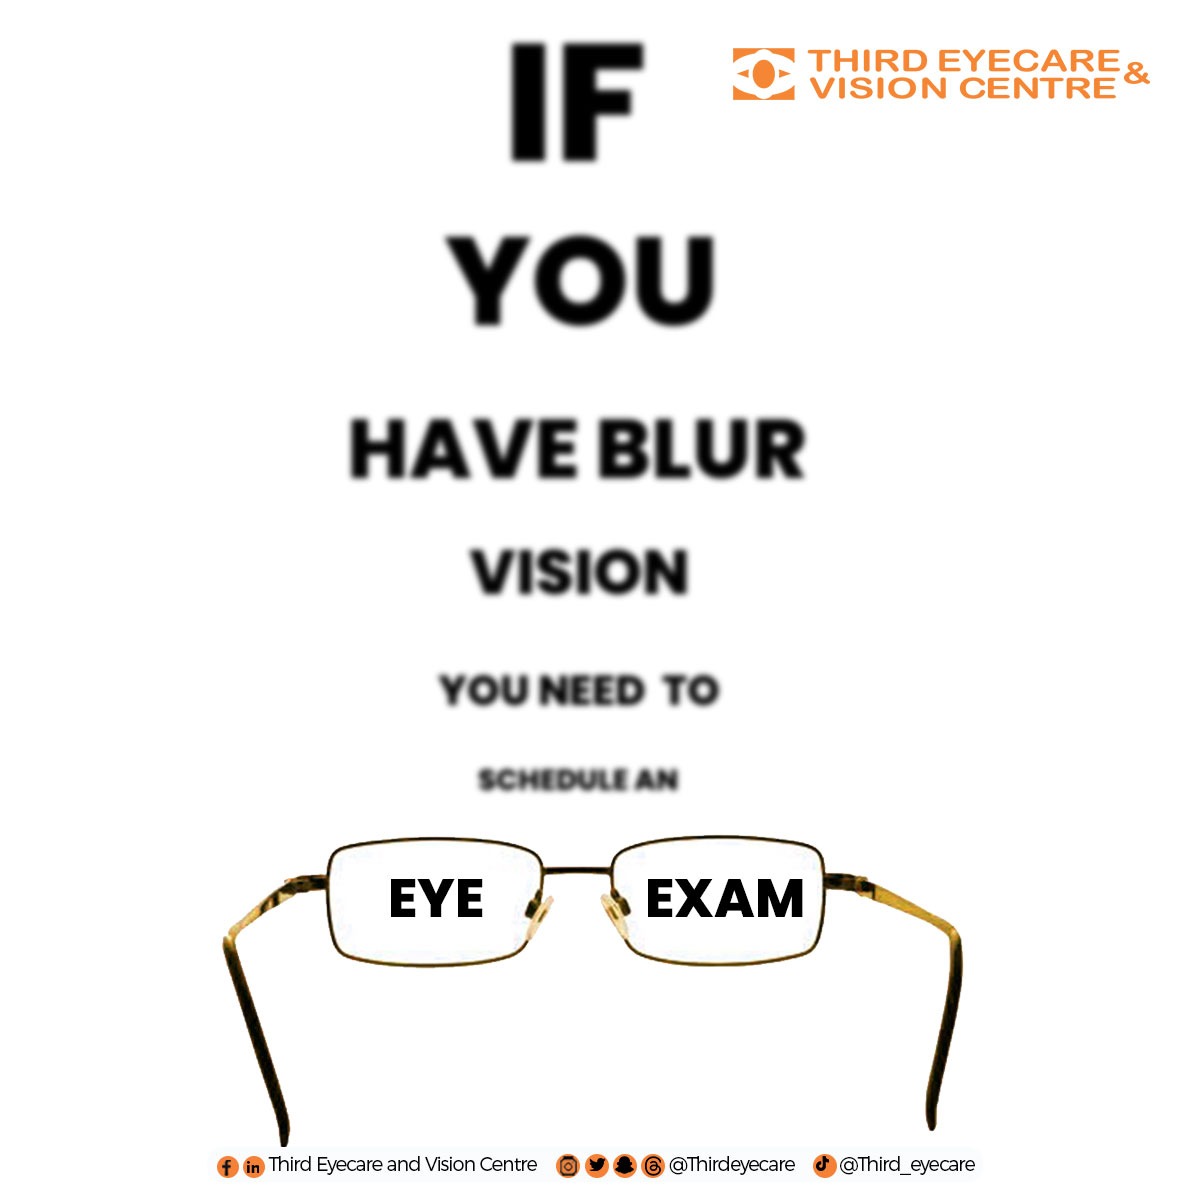 Don't let blurry vision hold you back – schedule your eye exam today and see things clearly again! #thirdyecareandvisioncentre #besteyeclinicinghana #eyeexam #explore #fyp #blurvision #april2024